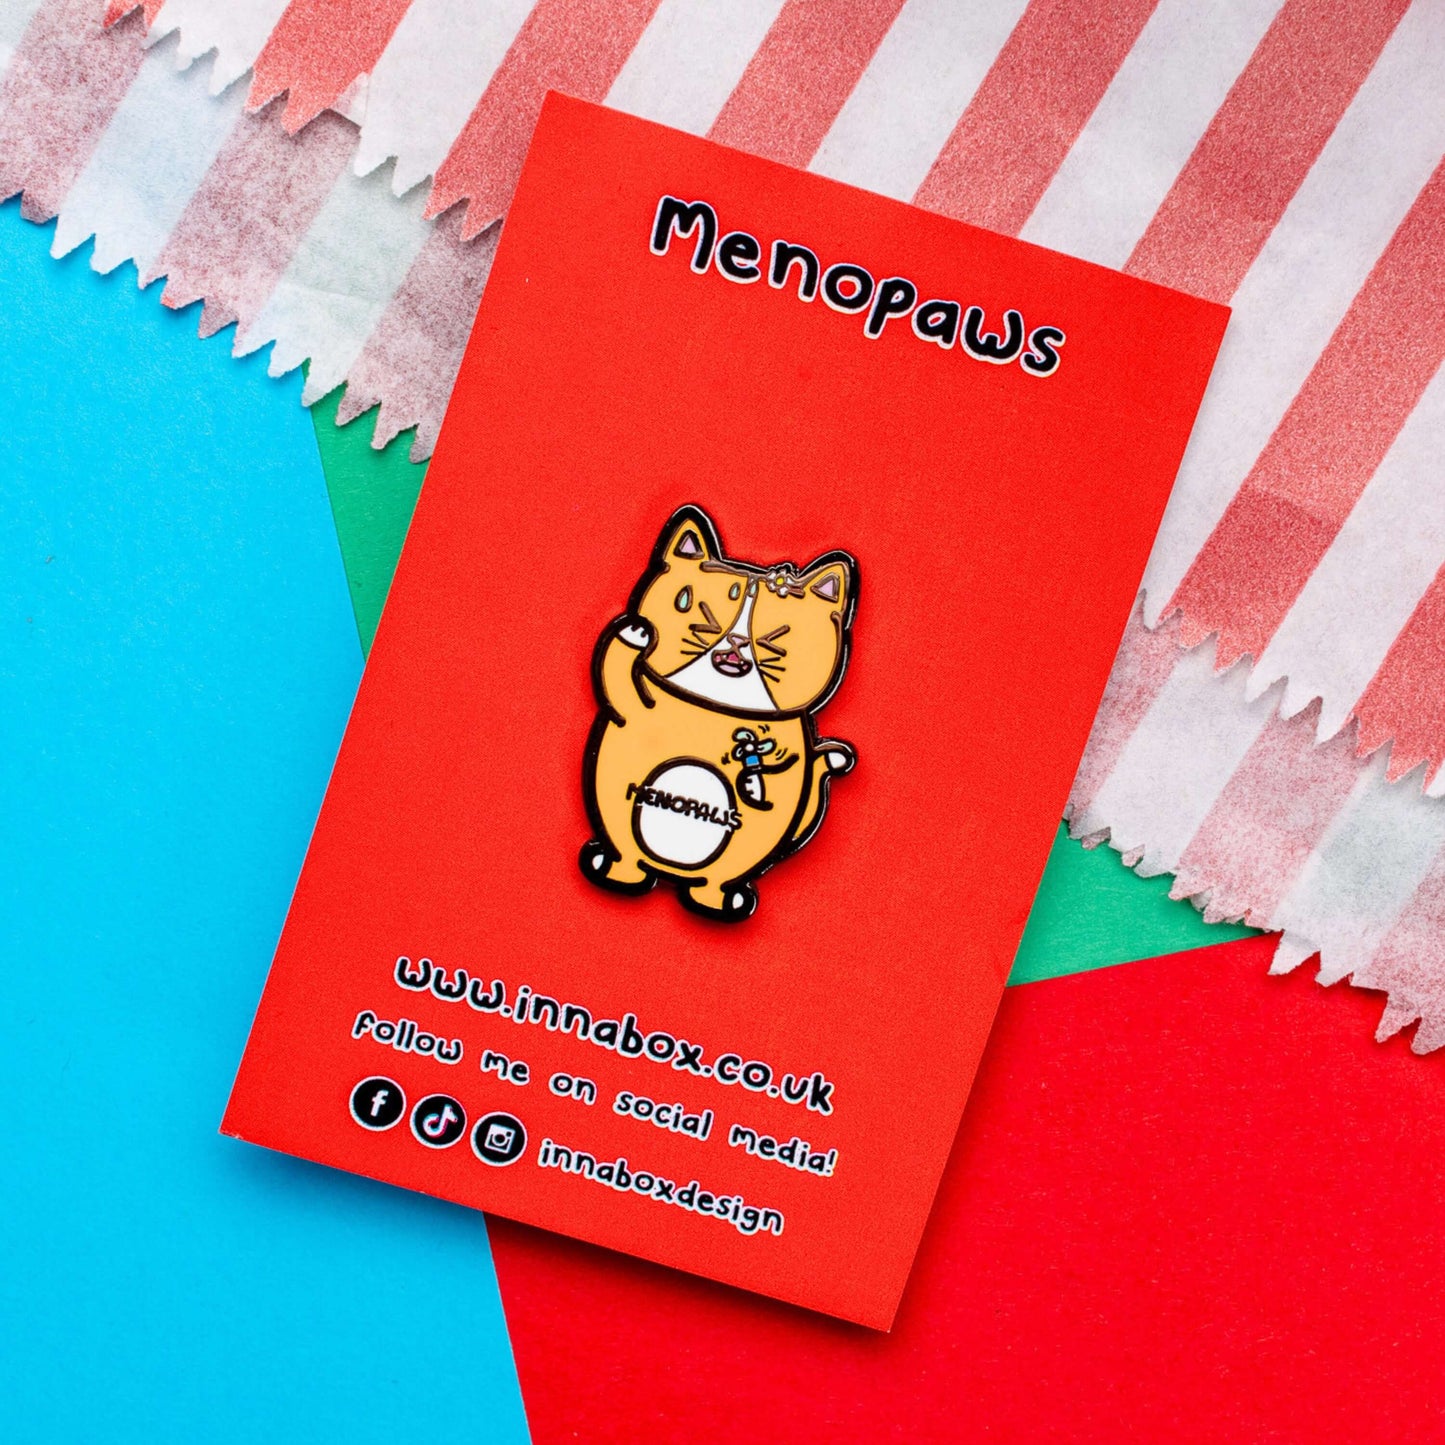 Menopaws Enamel Pin - Menopause on red backing card laid on a red, blue and green card background. The enamel pin is of a menopausal ginger and white cat with a daisy in it's hair. The cat is holding an electric fan and is looking hot with sweat droplets on it's face. Hand drawn design made to raise awareness for menopause.